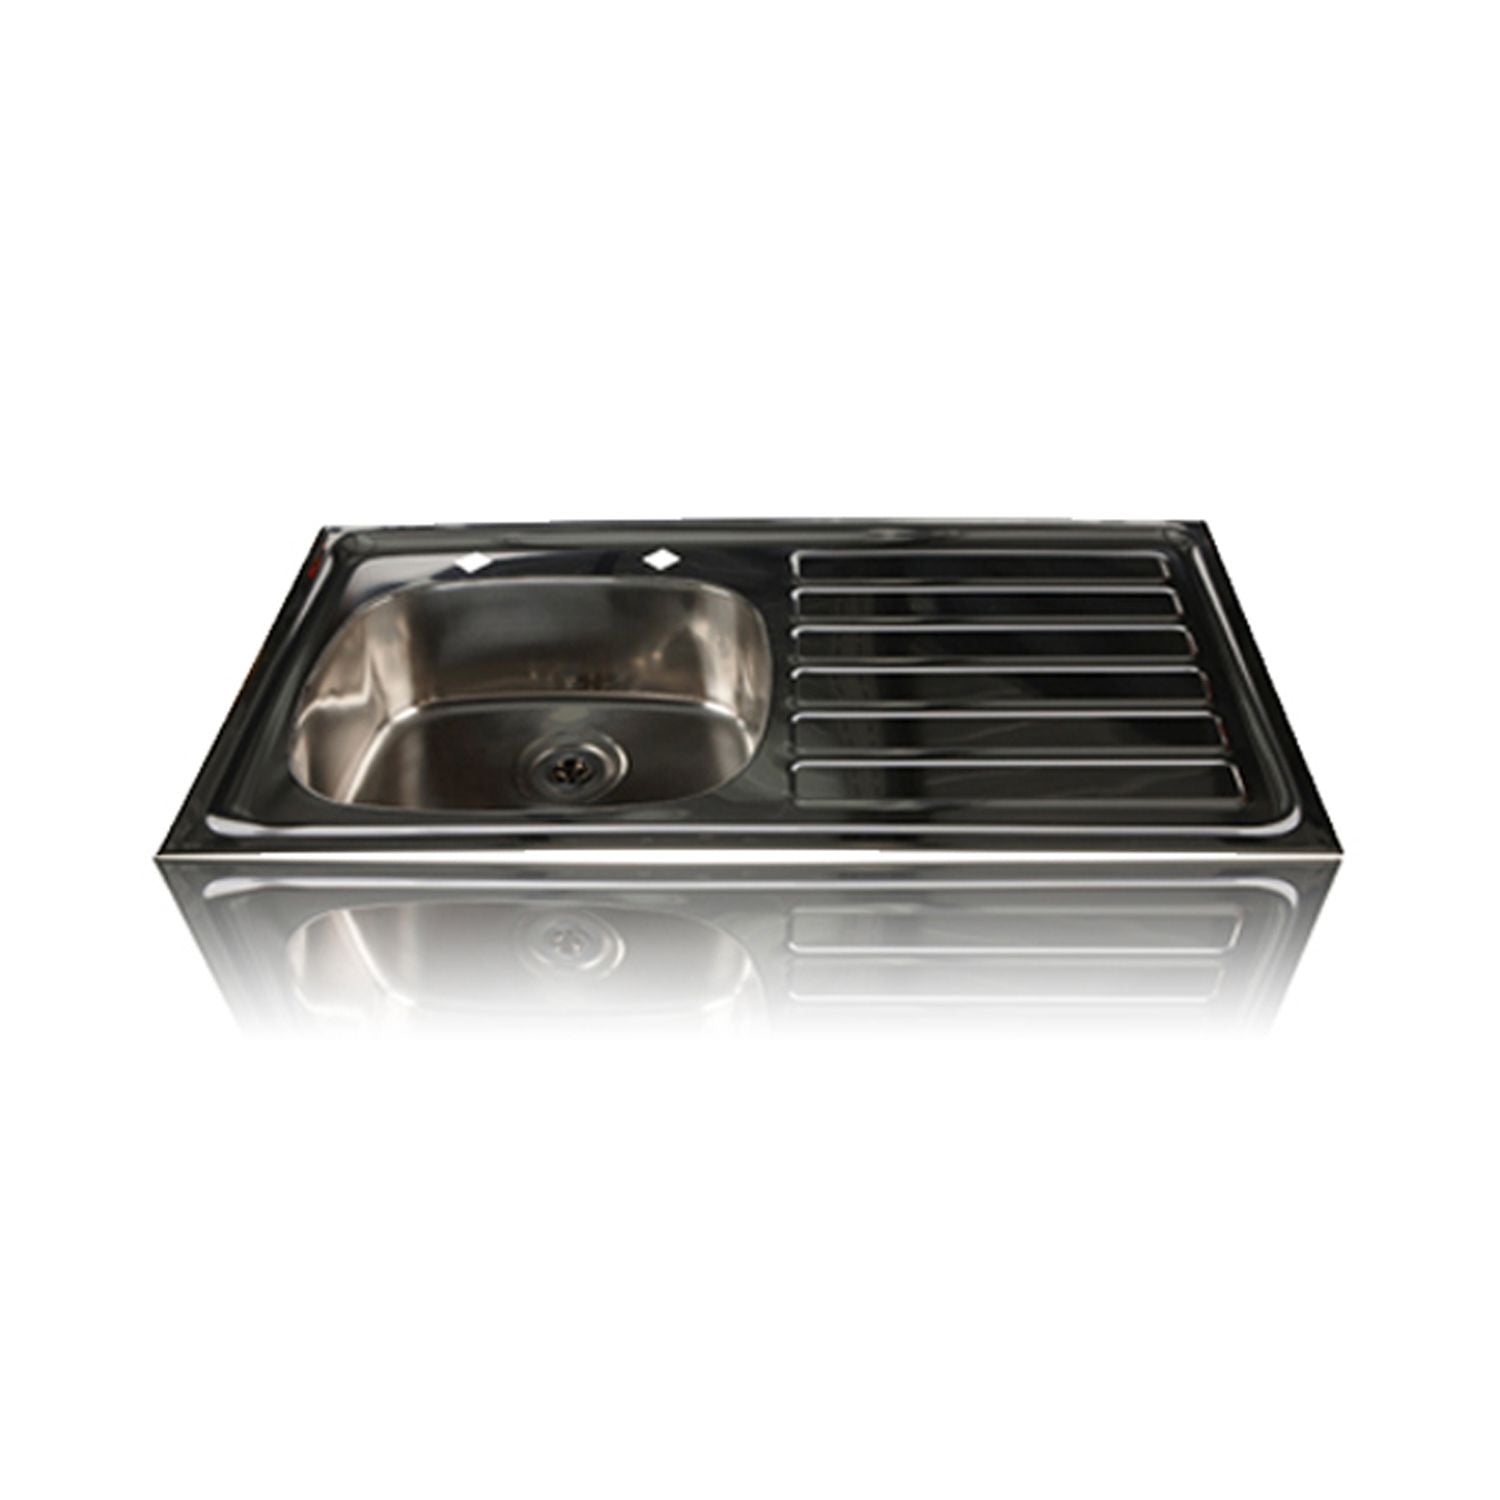 Sunflower HTM64 Compliant Inset Stainless Steel Sink | Right Hand Drainer